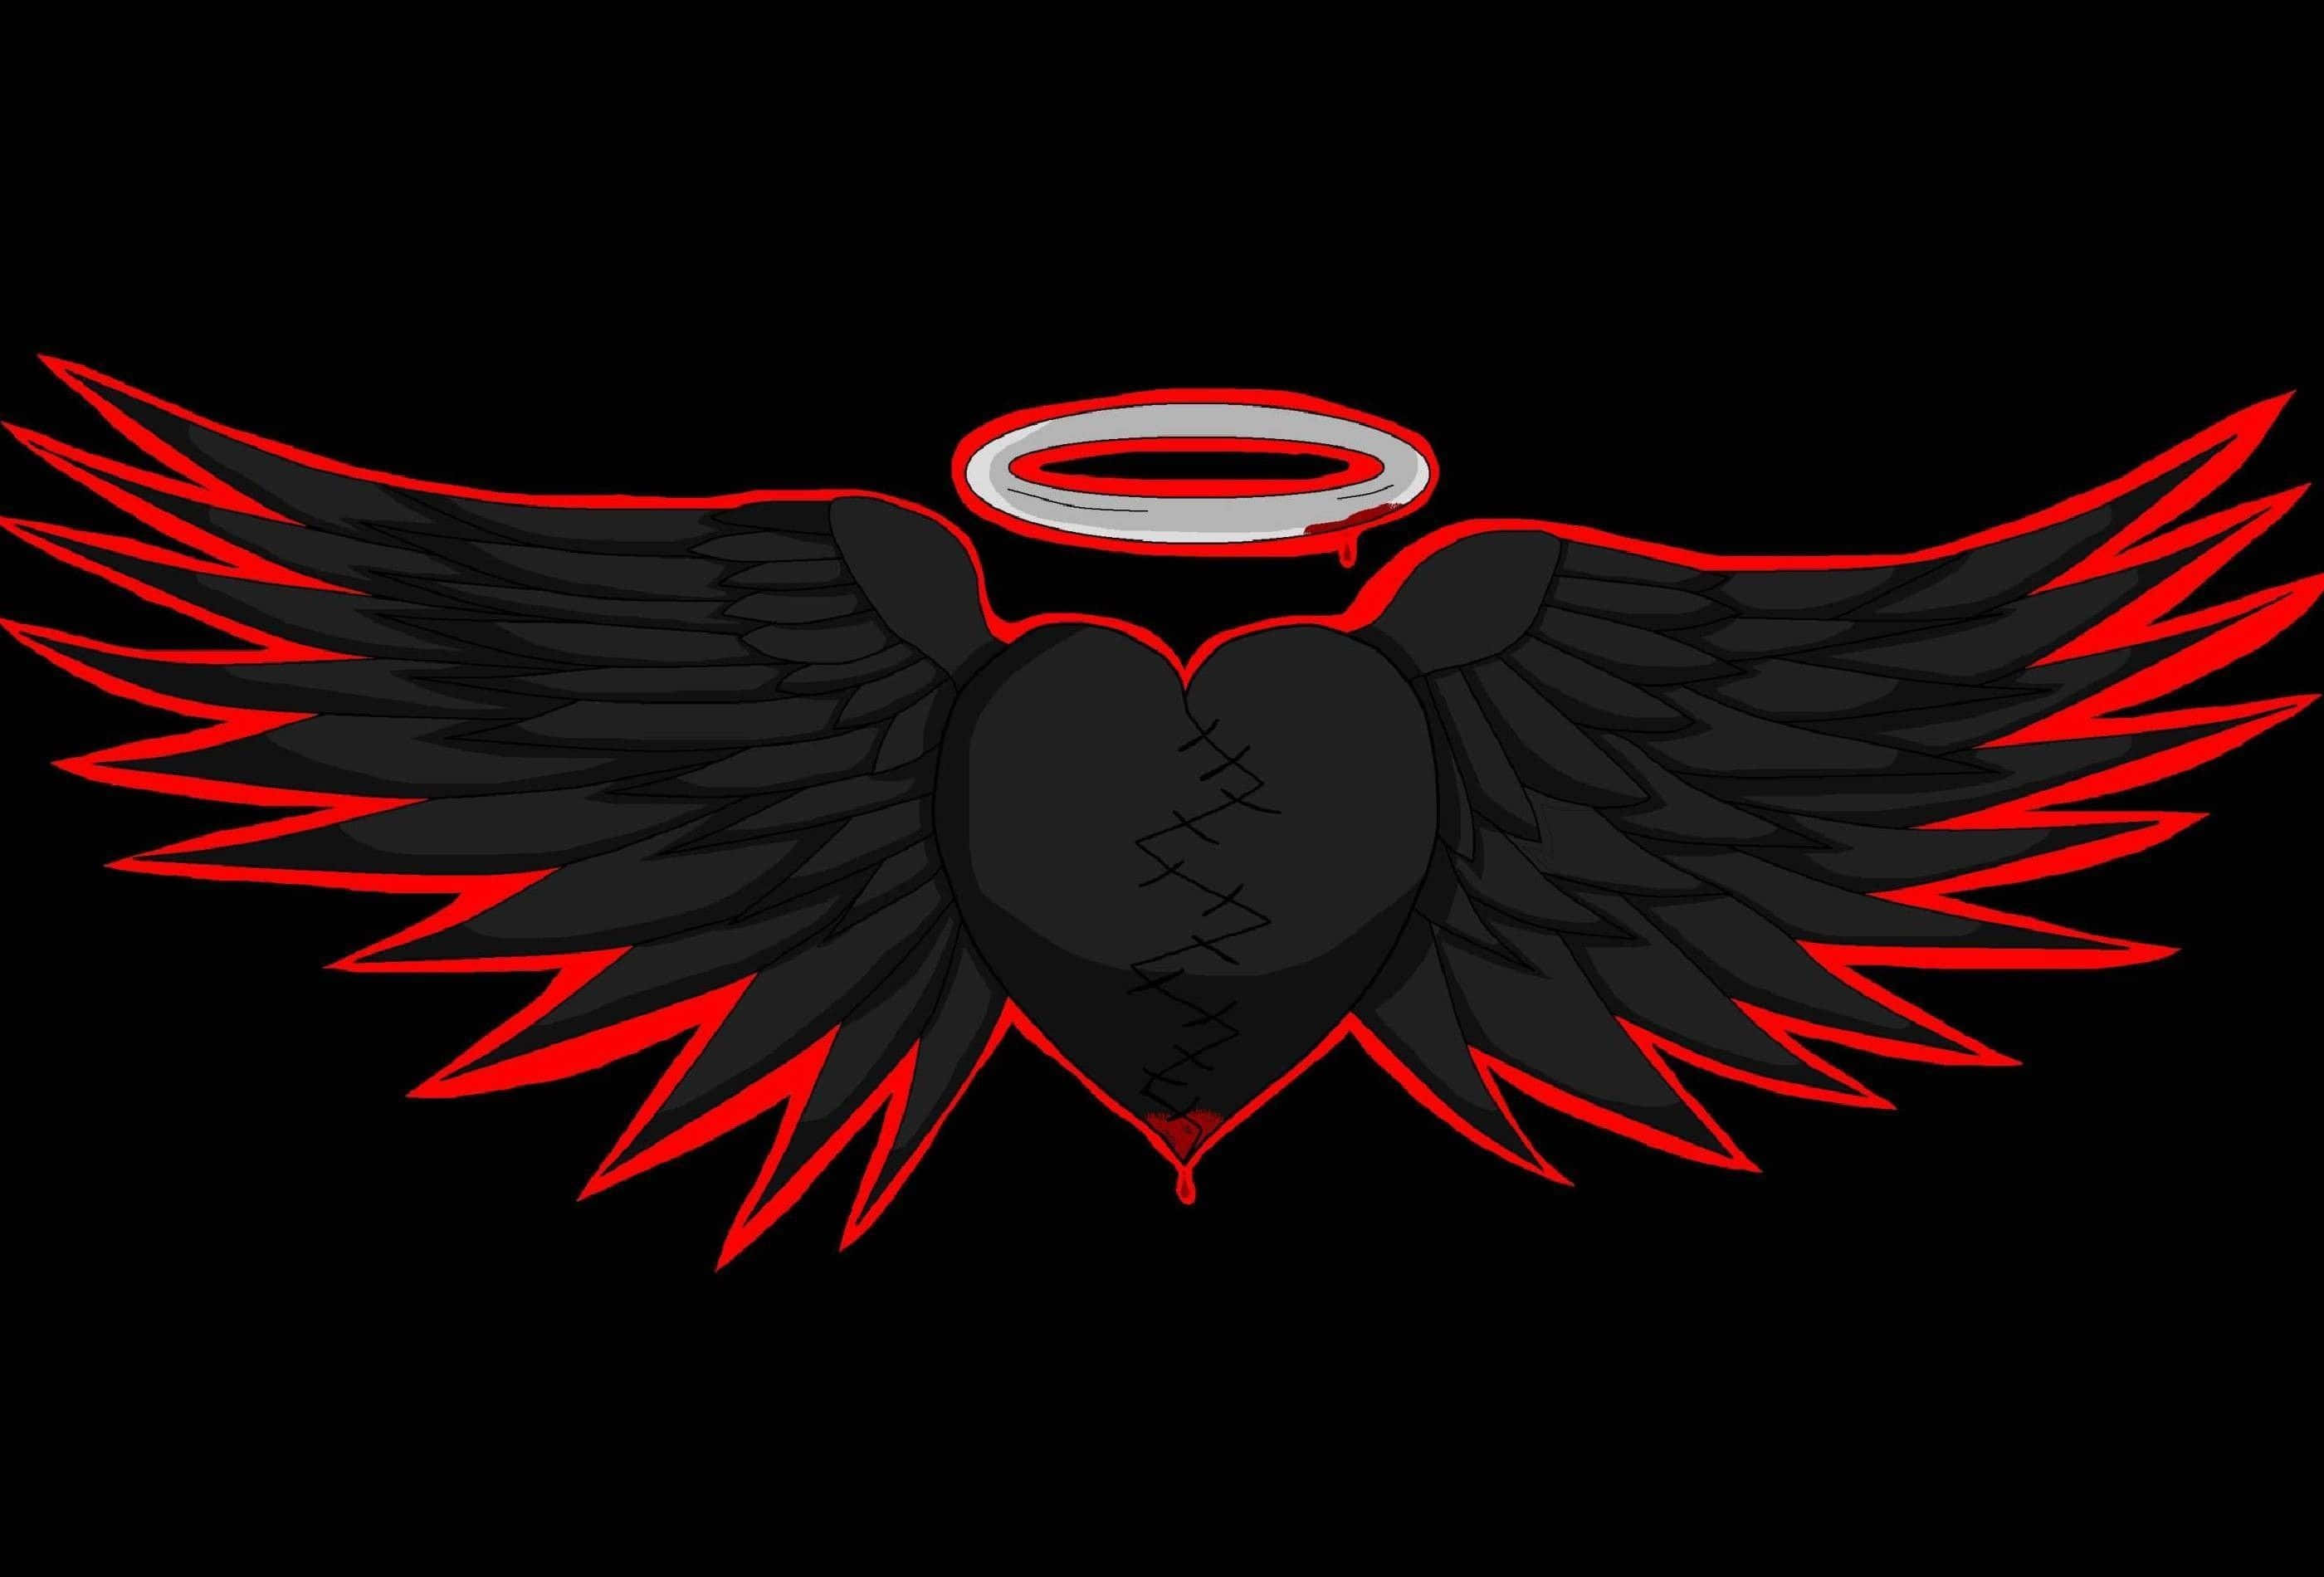 A Black And Red Heart With Wings